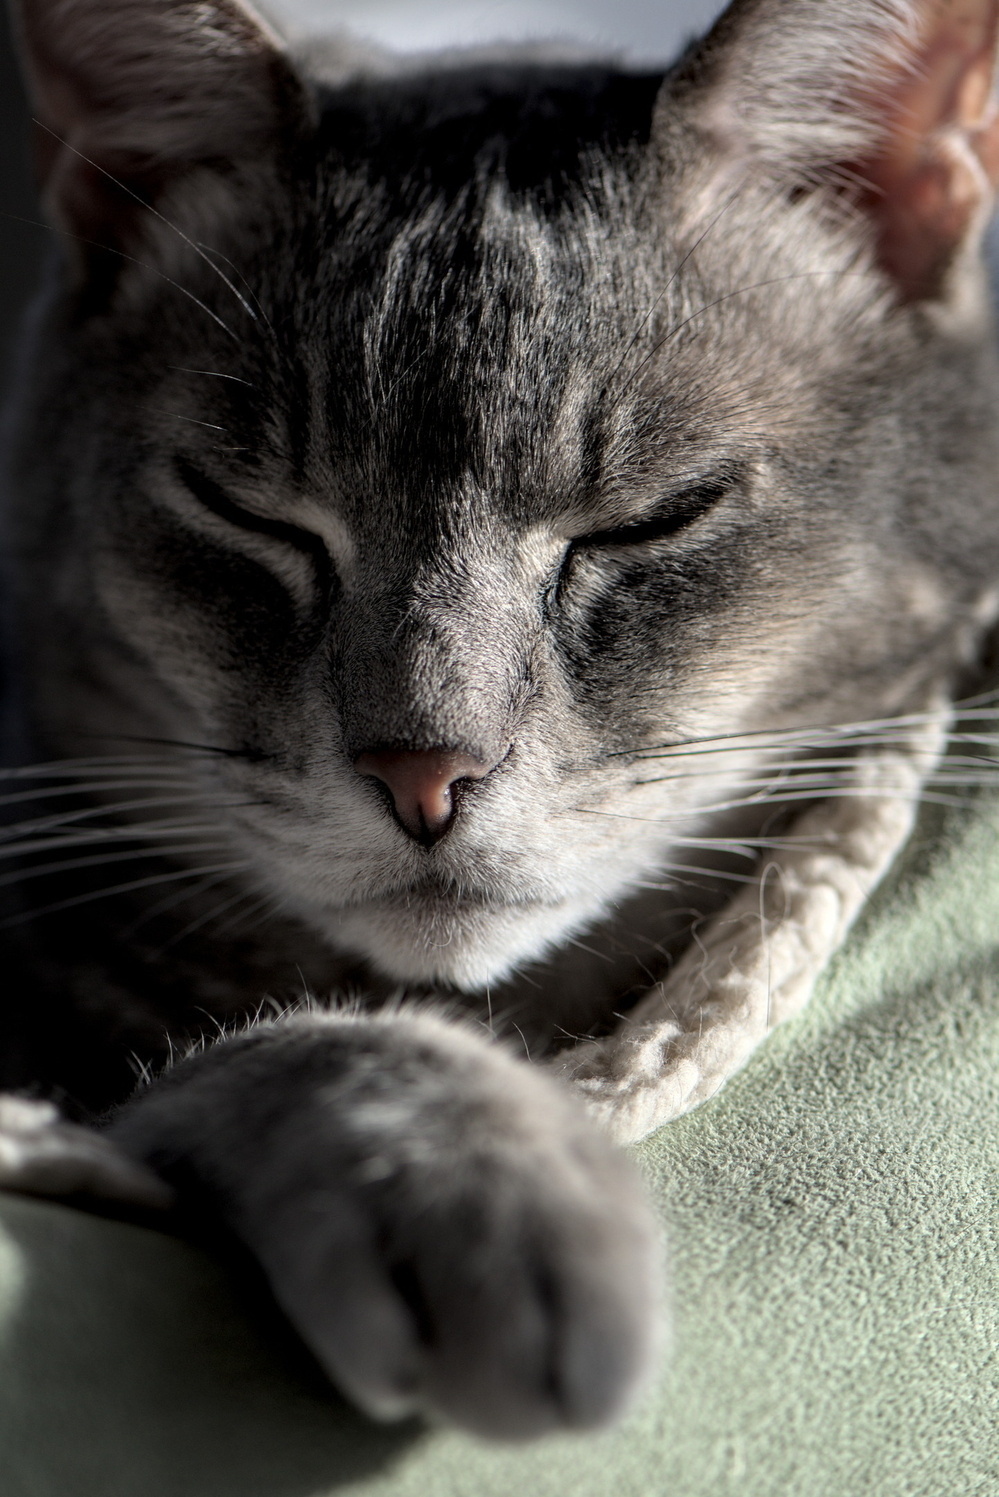 Closeup of a cat looking sleepy and somewhat grumpy.